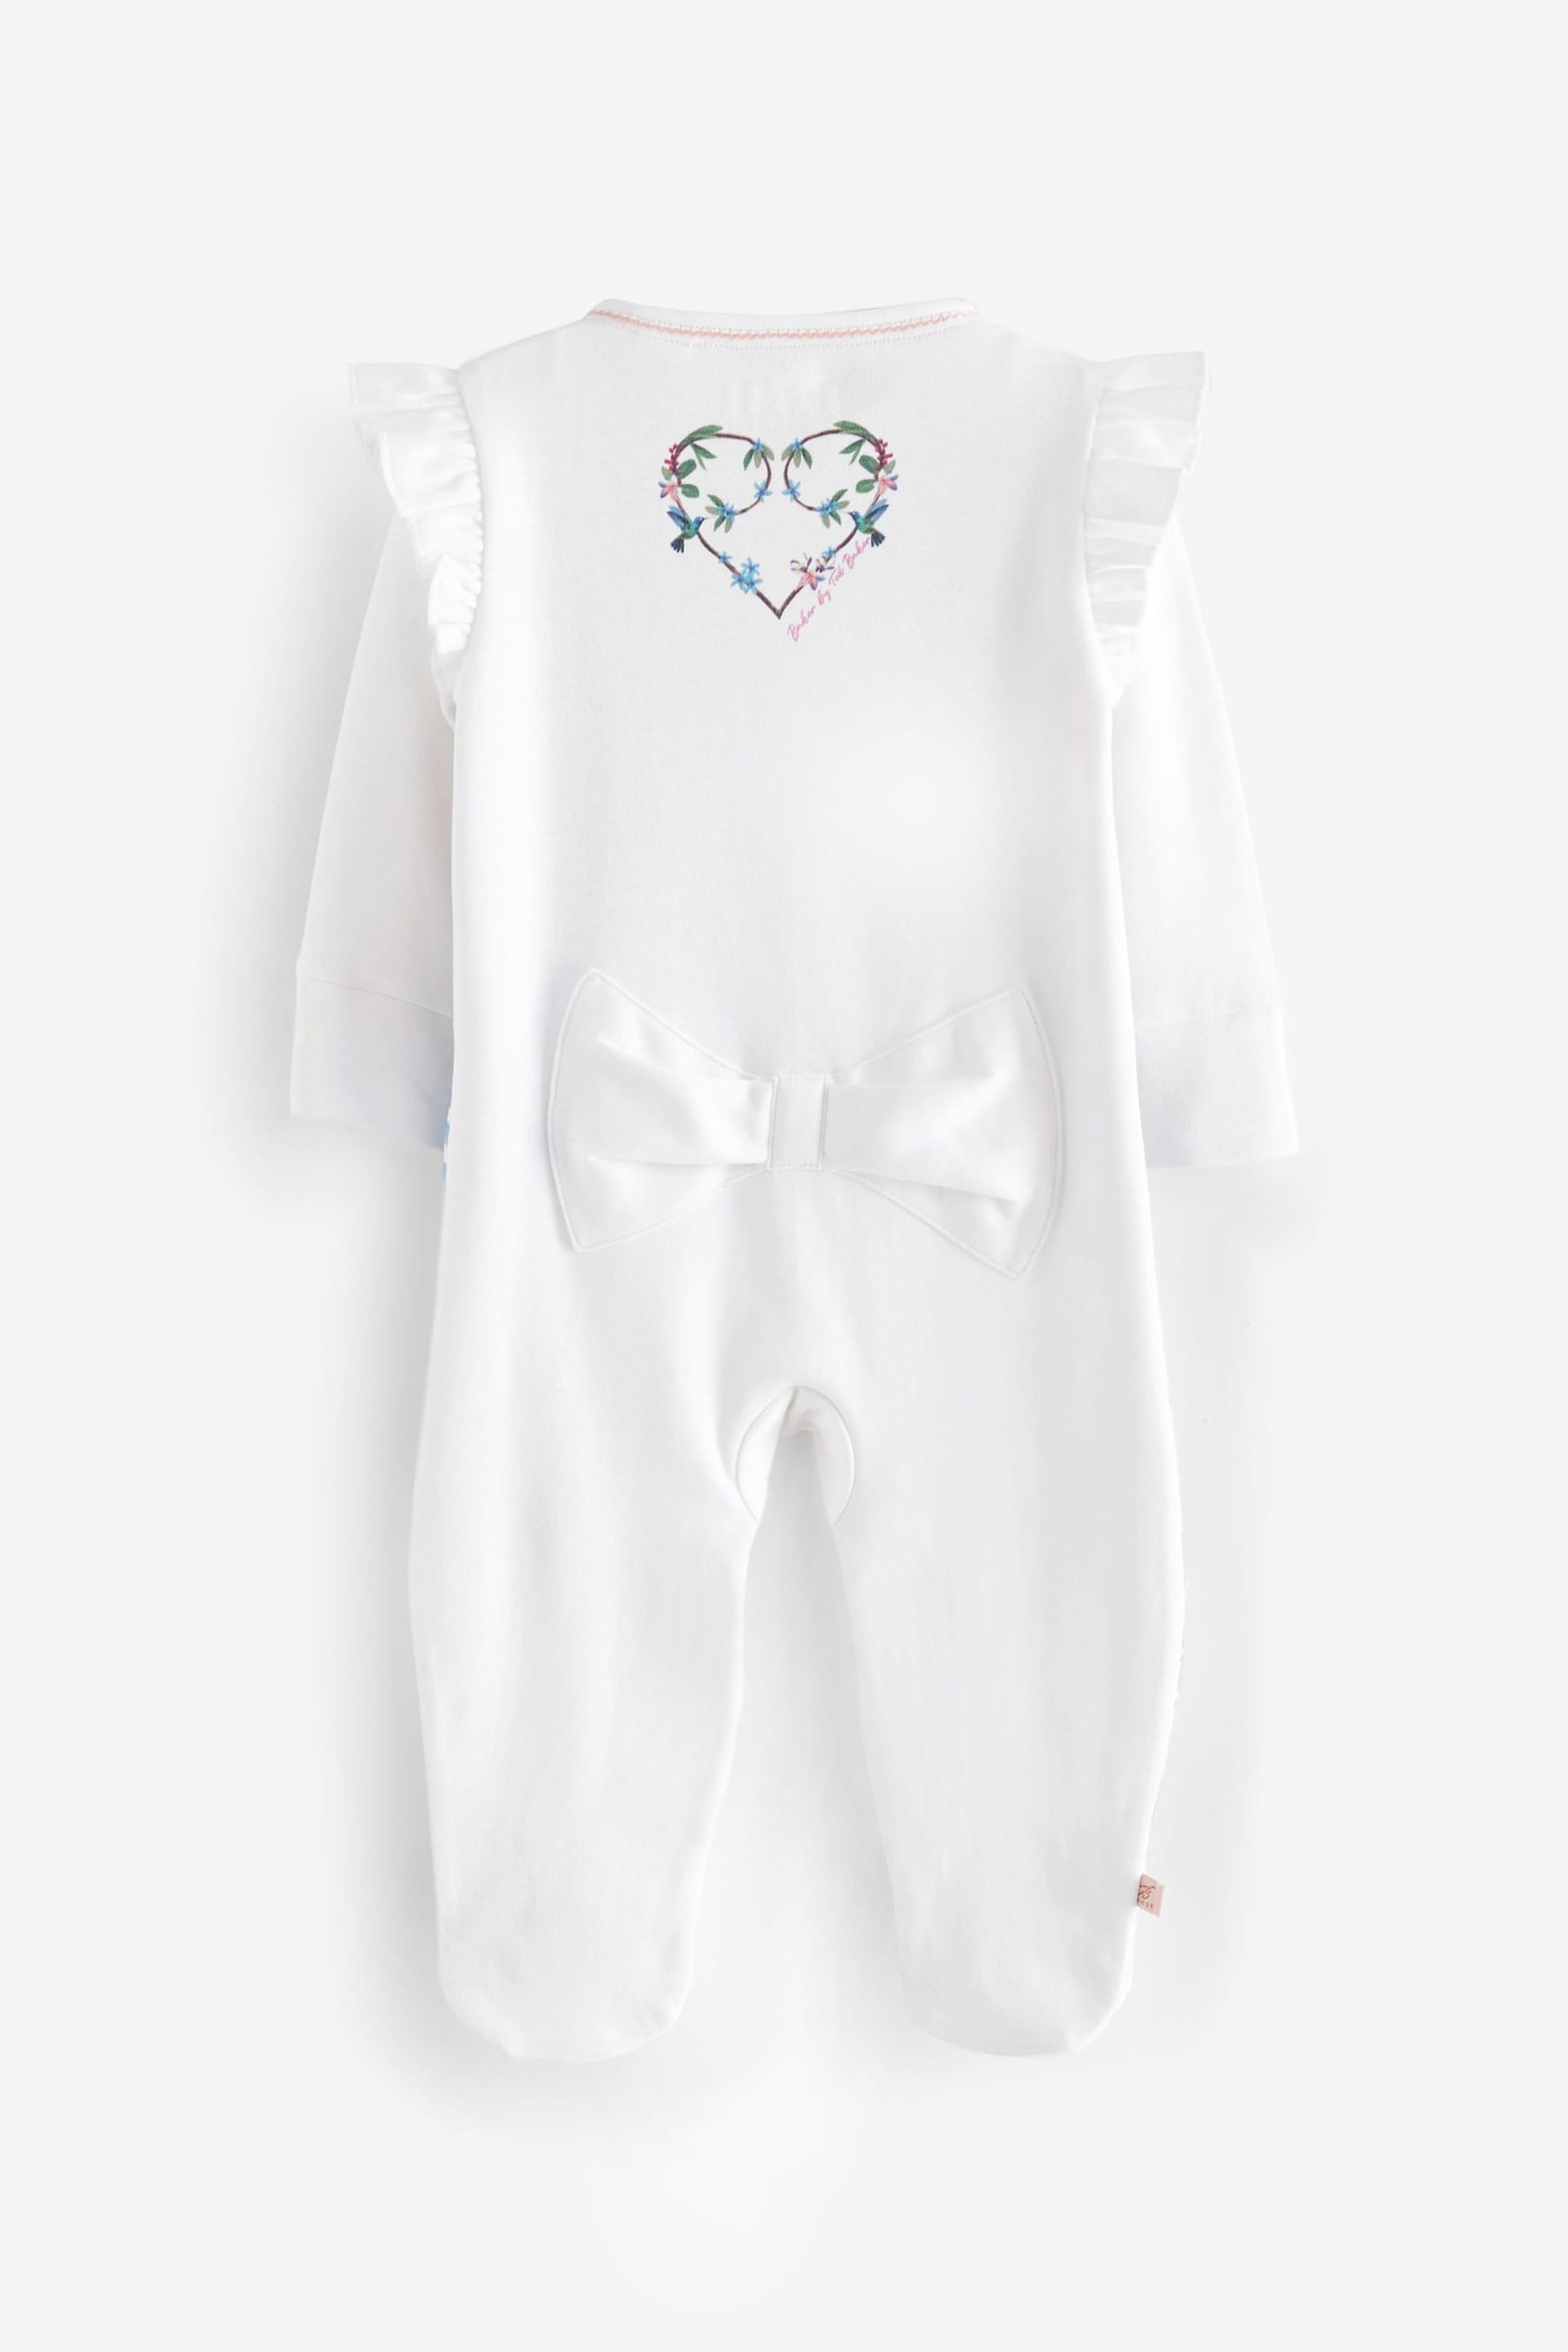 Baker by Ted Baker Mirror Floral White Sleepsuit And Hat Set - Image 2 of 5